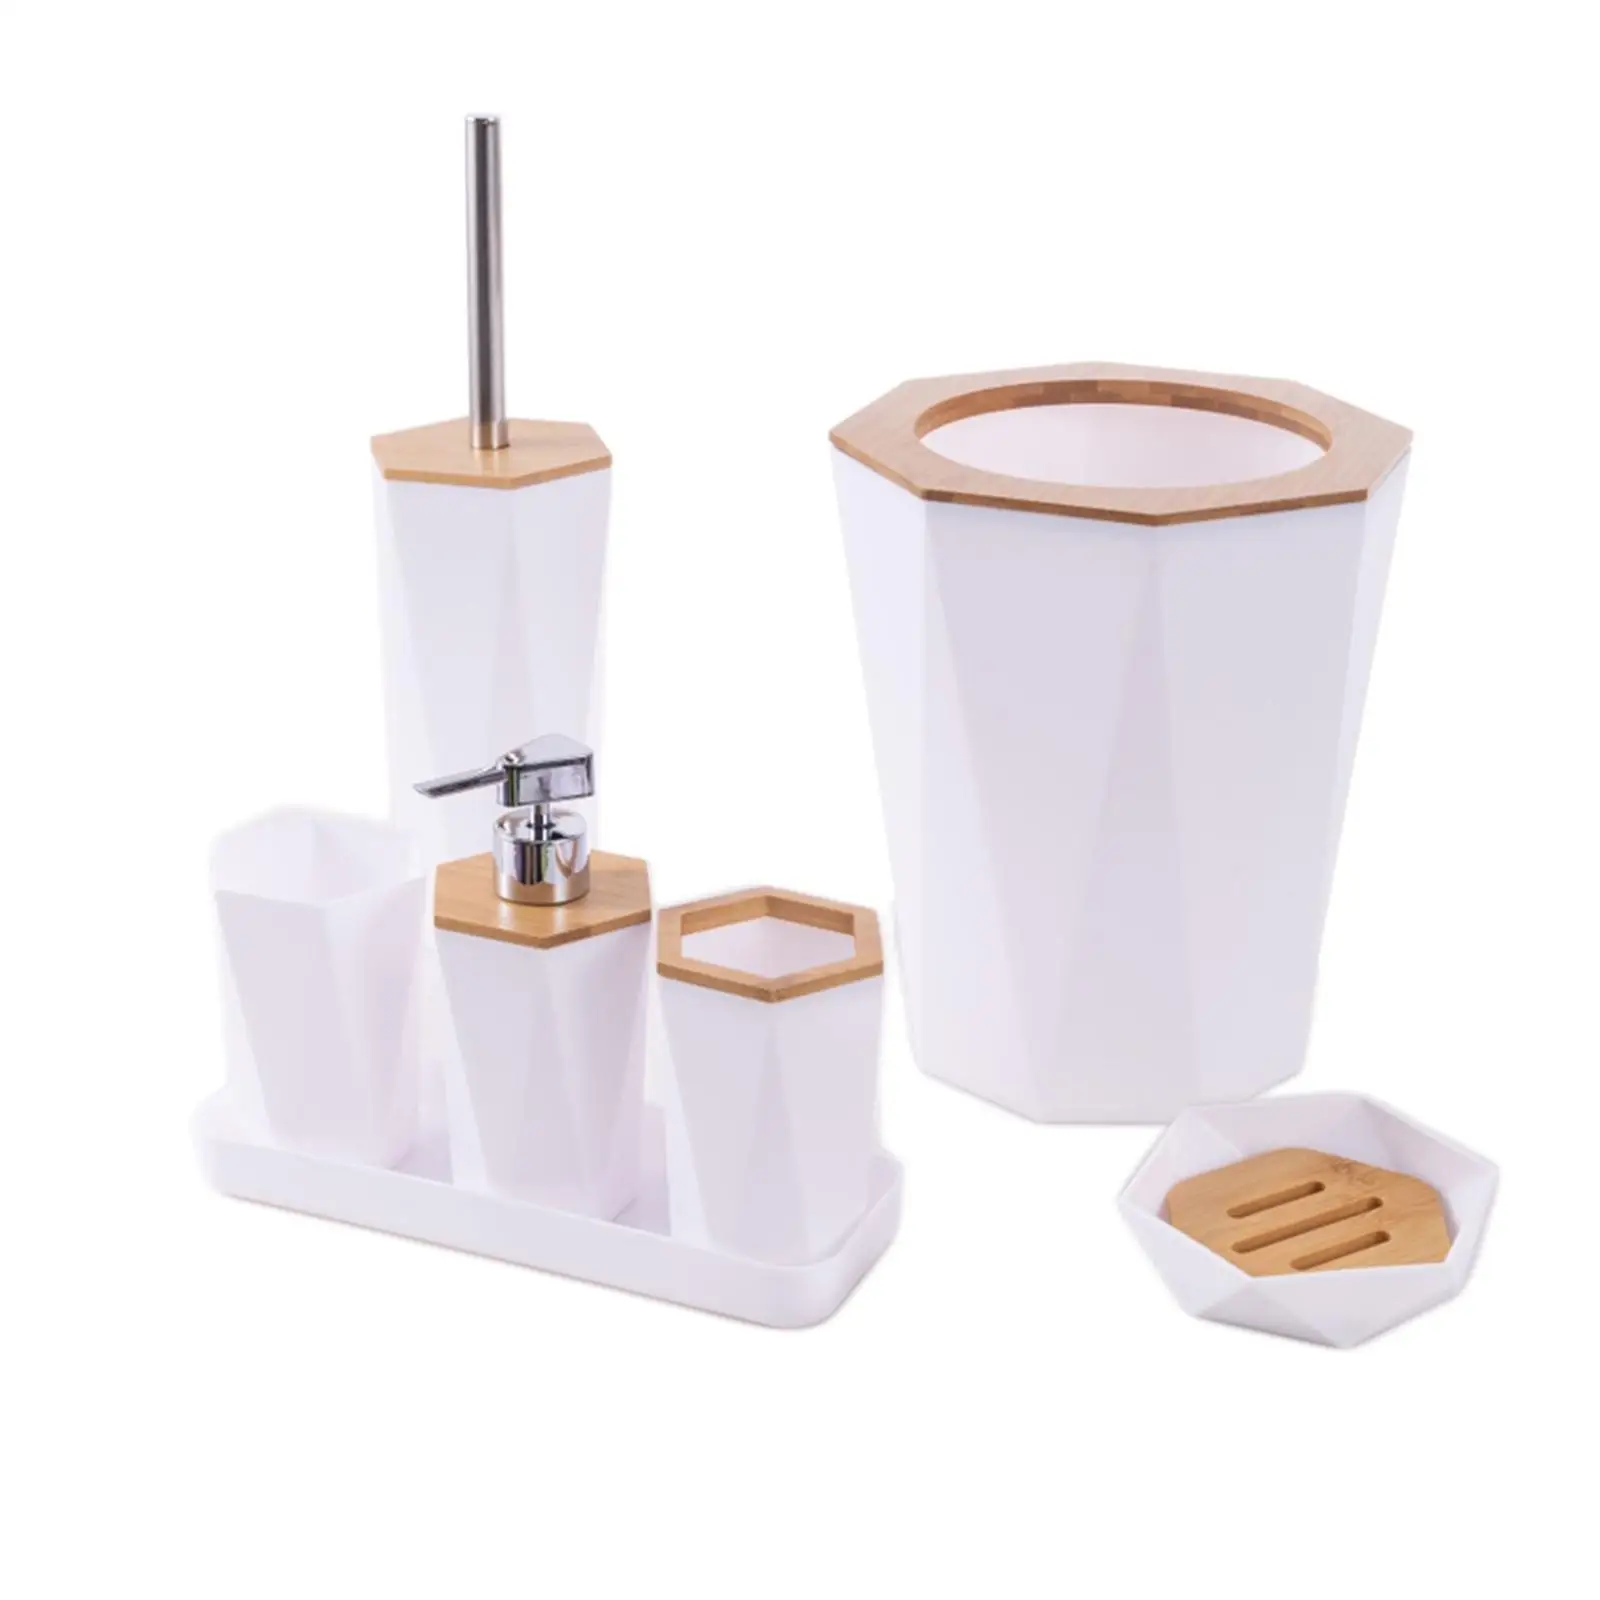 Bathroom Accessories Set Soap Dish Soap Dispenser Toothbrush Cup Toilet Brush Holder Tray 7 Pieces Set for Hotel Household Home